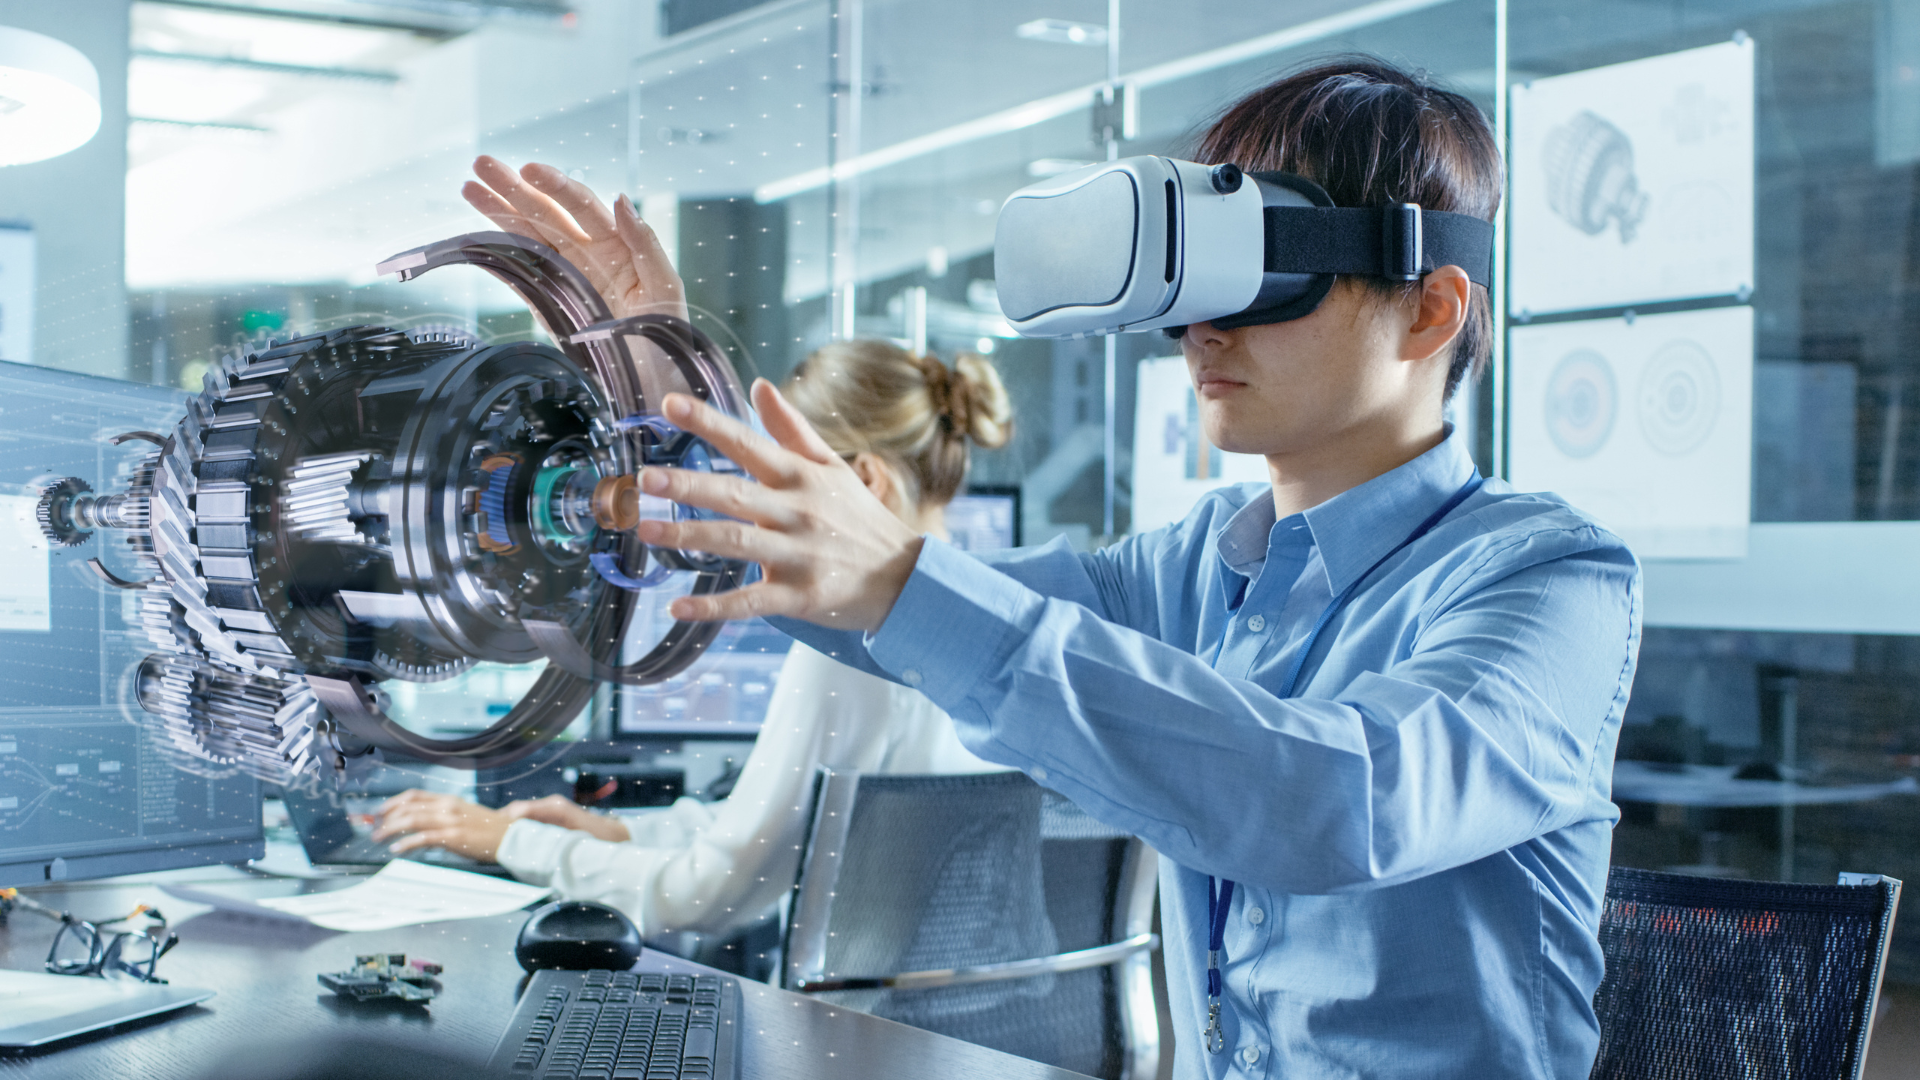 An engineer using a Virtual Reality headset to work on a digital image of a rotary engine